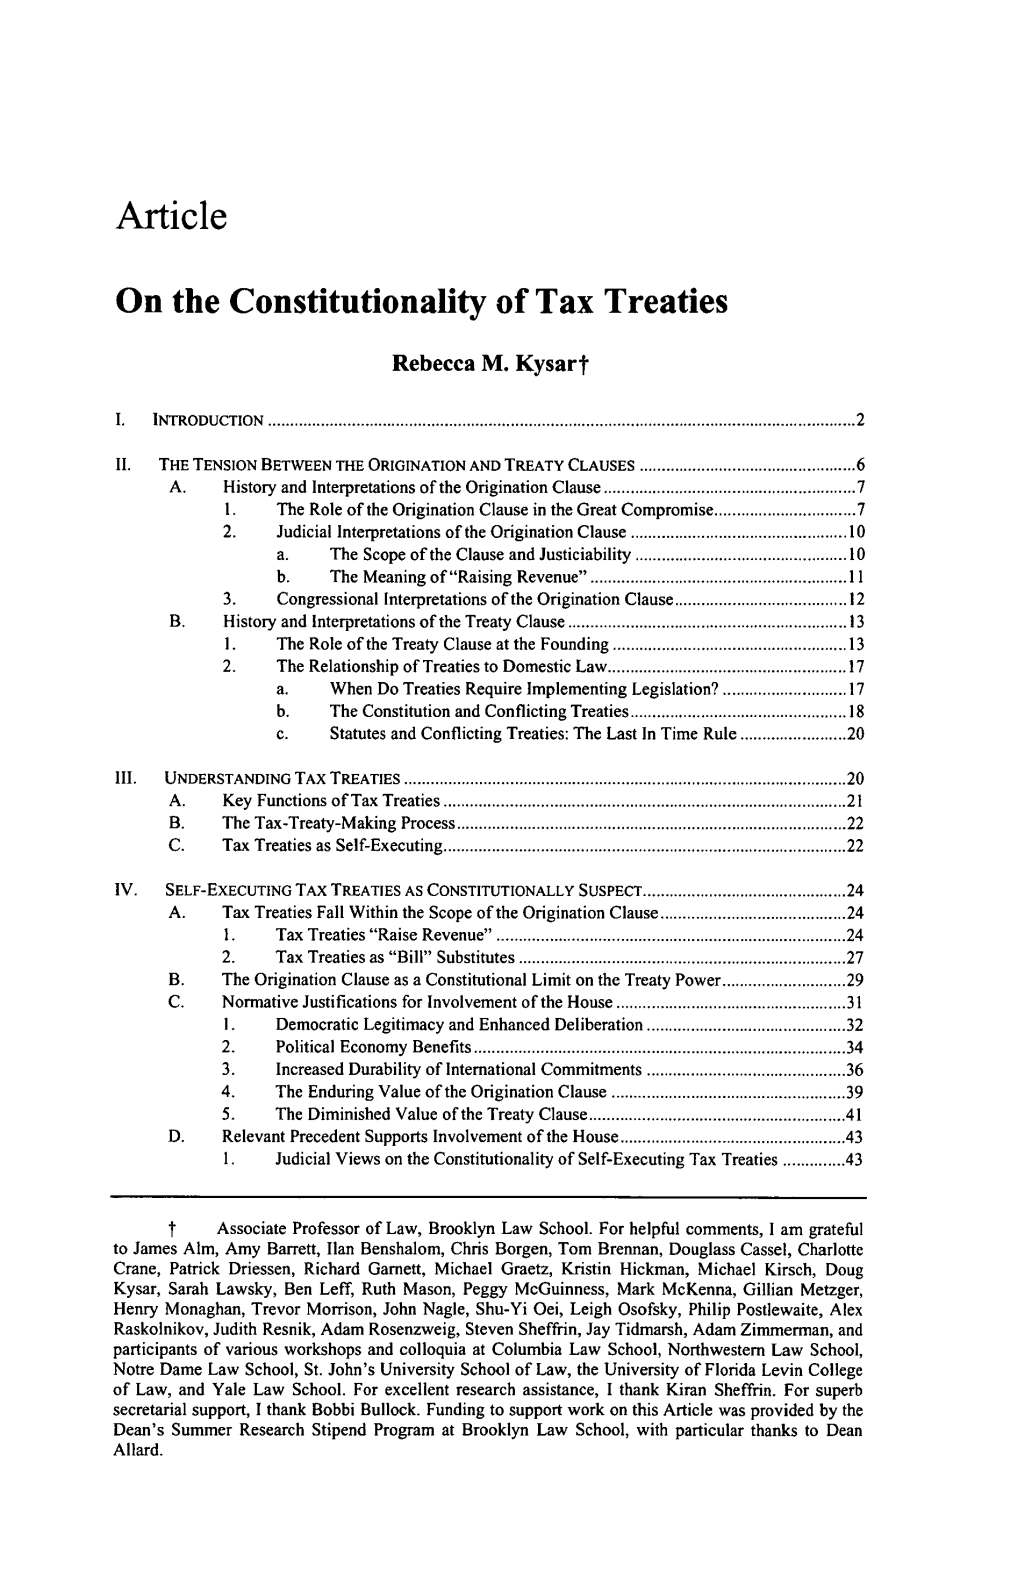 On the Constitutionality of Tax Treaties